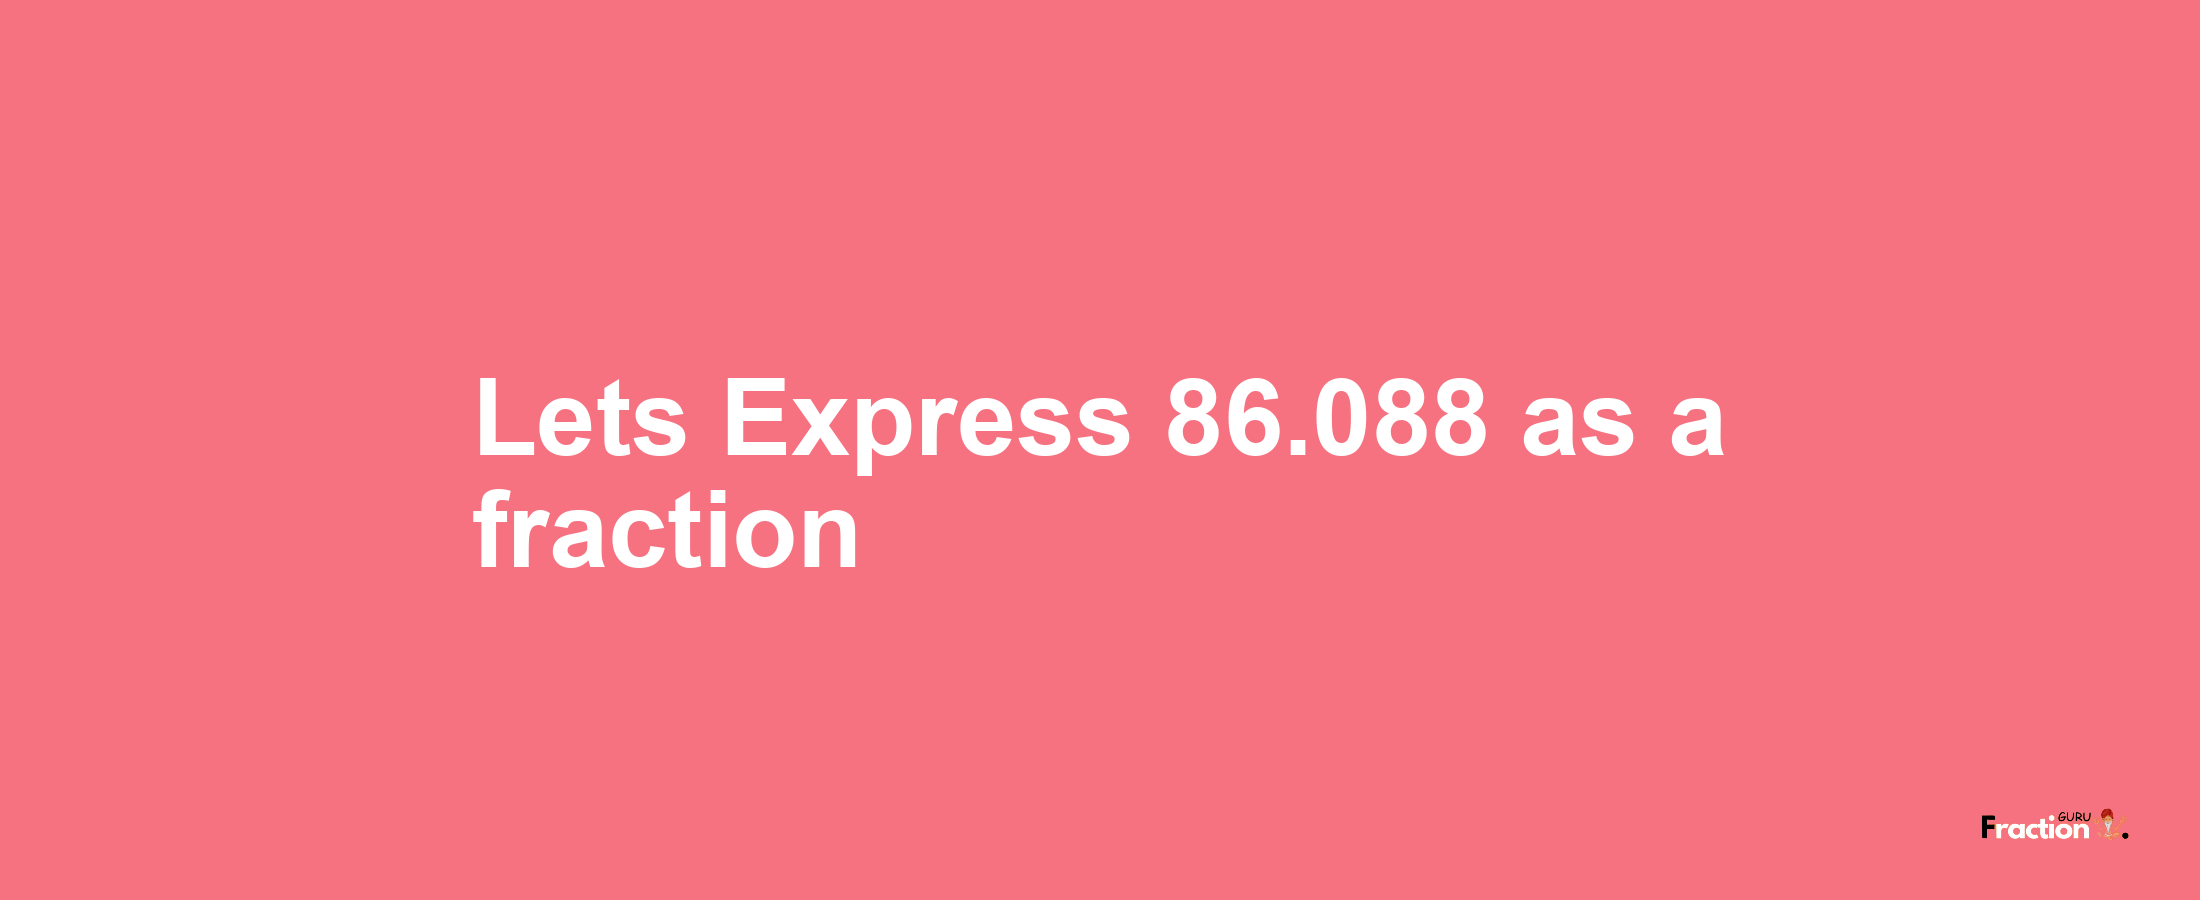 Lets Express 86.088 as afraction